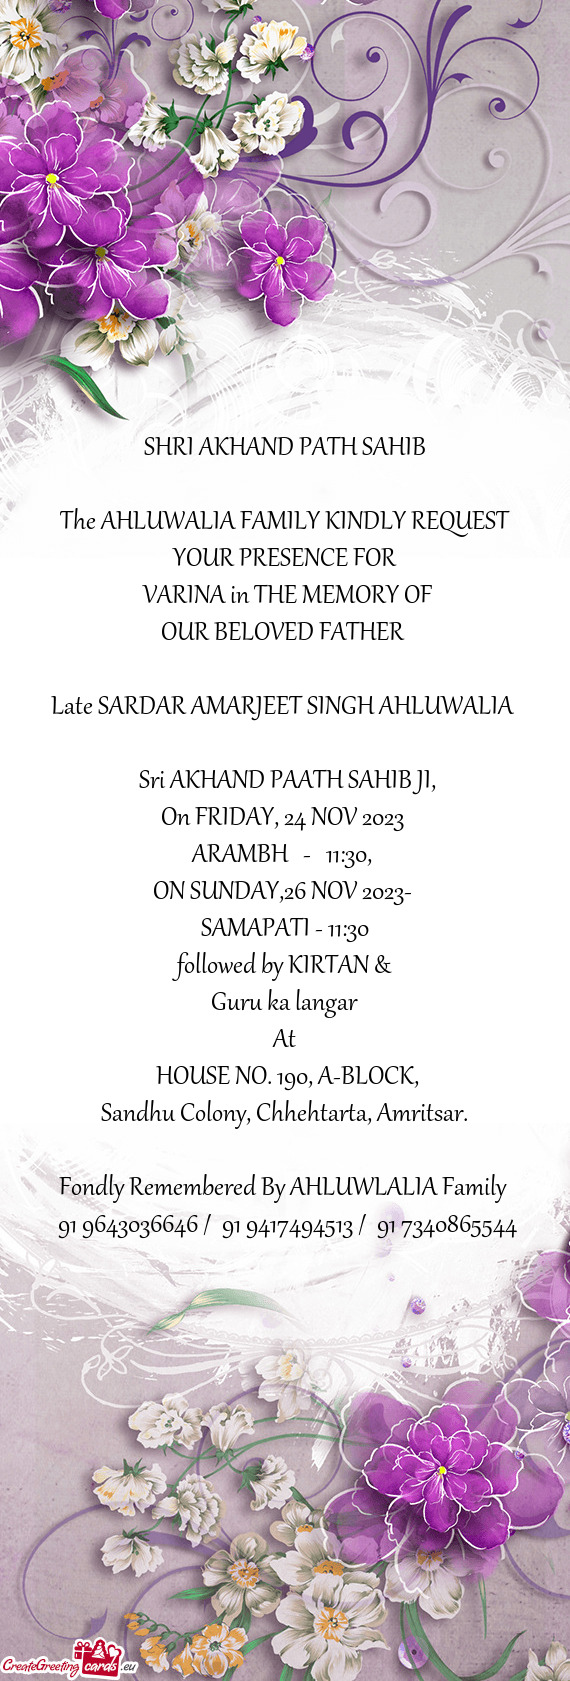 The AHLUWALIA FAMILY KINDLY REQUEST